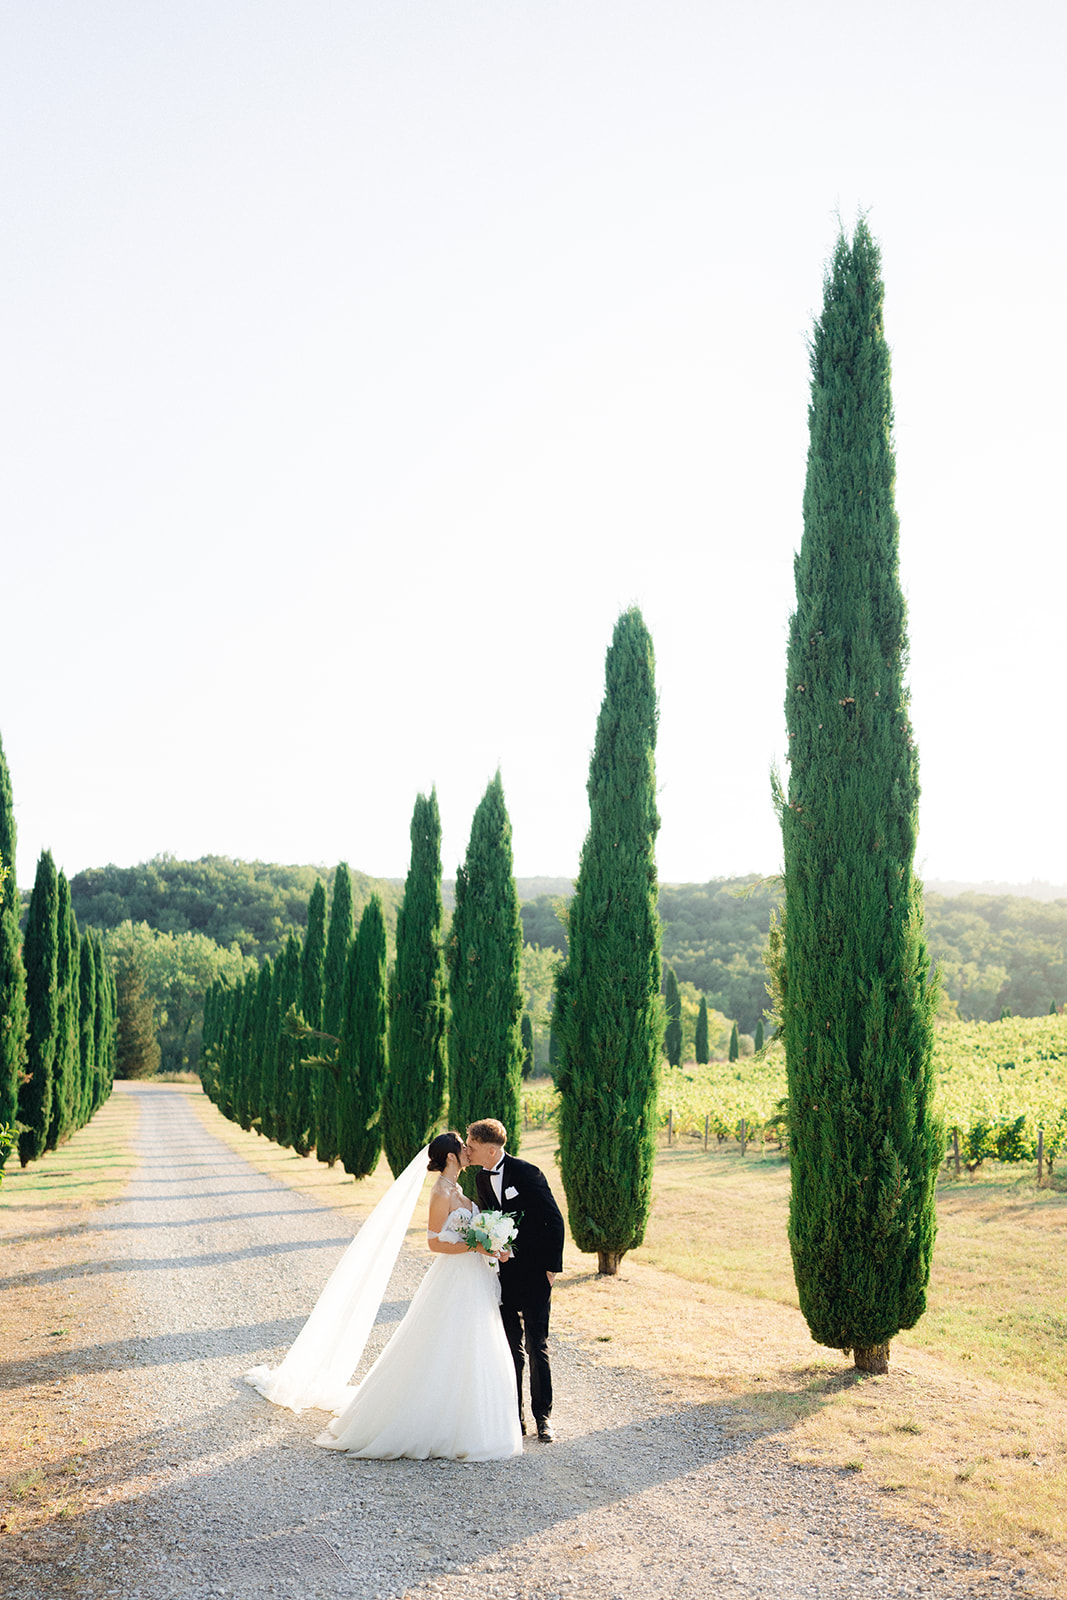 The newlyweds kissing along a cypress-lined avenue in Tuscany